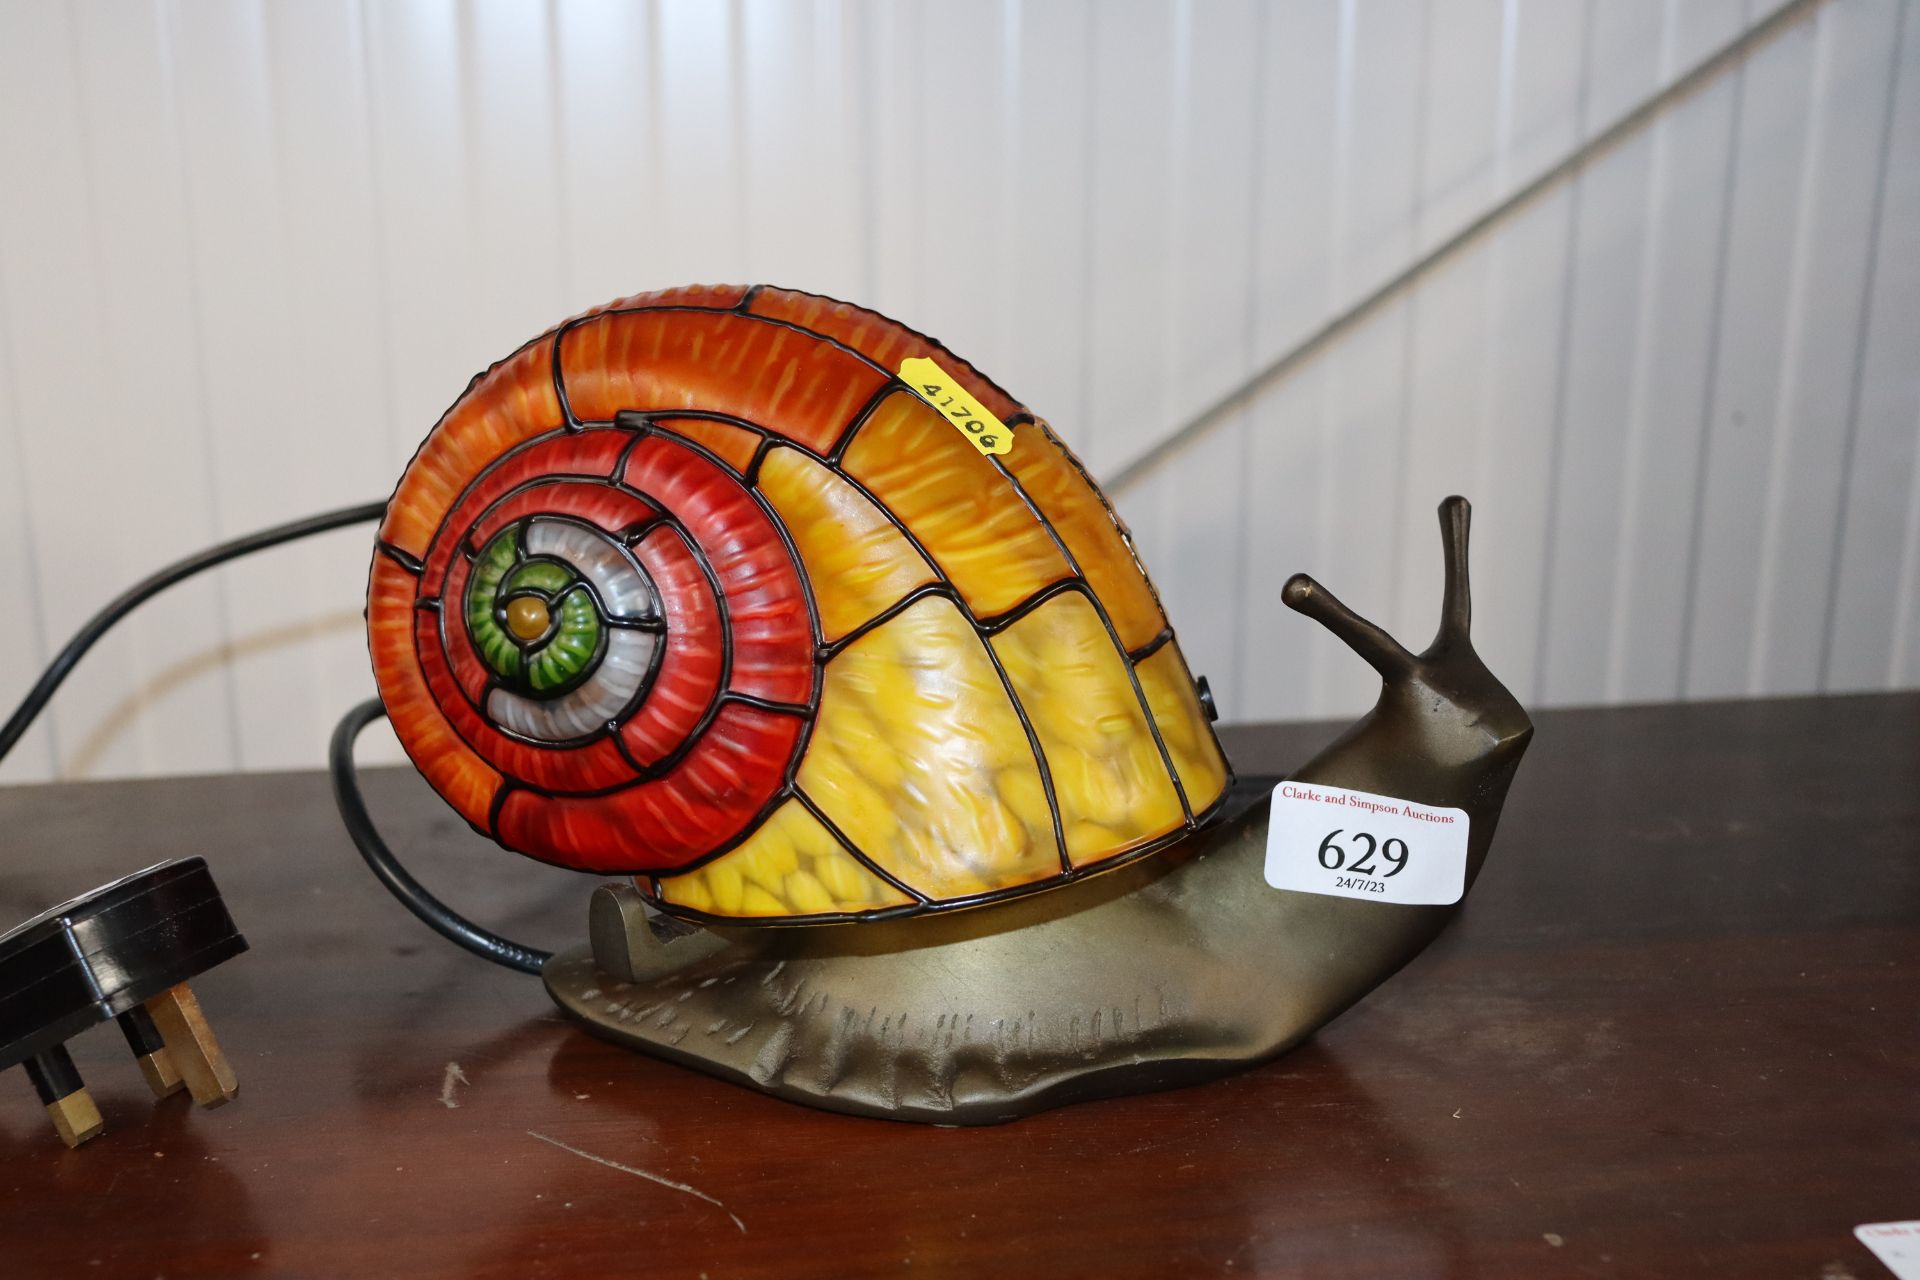 A novelty table lamp in the form of a snail